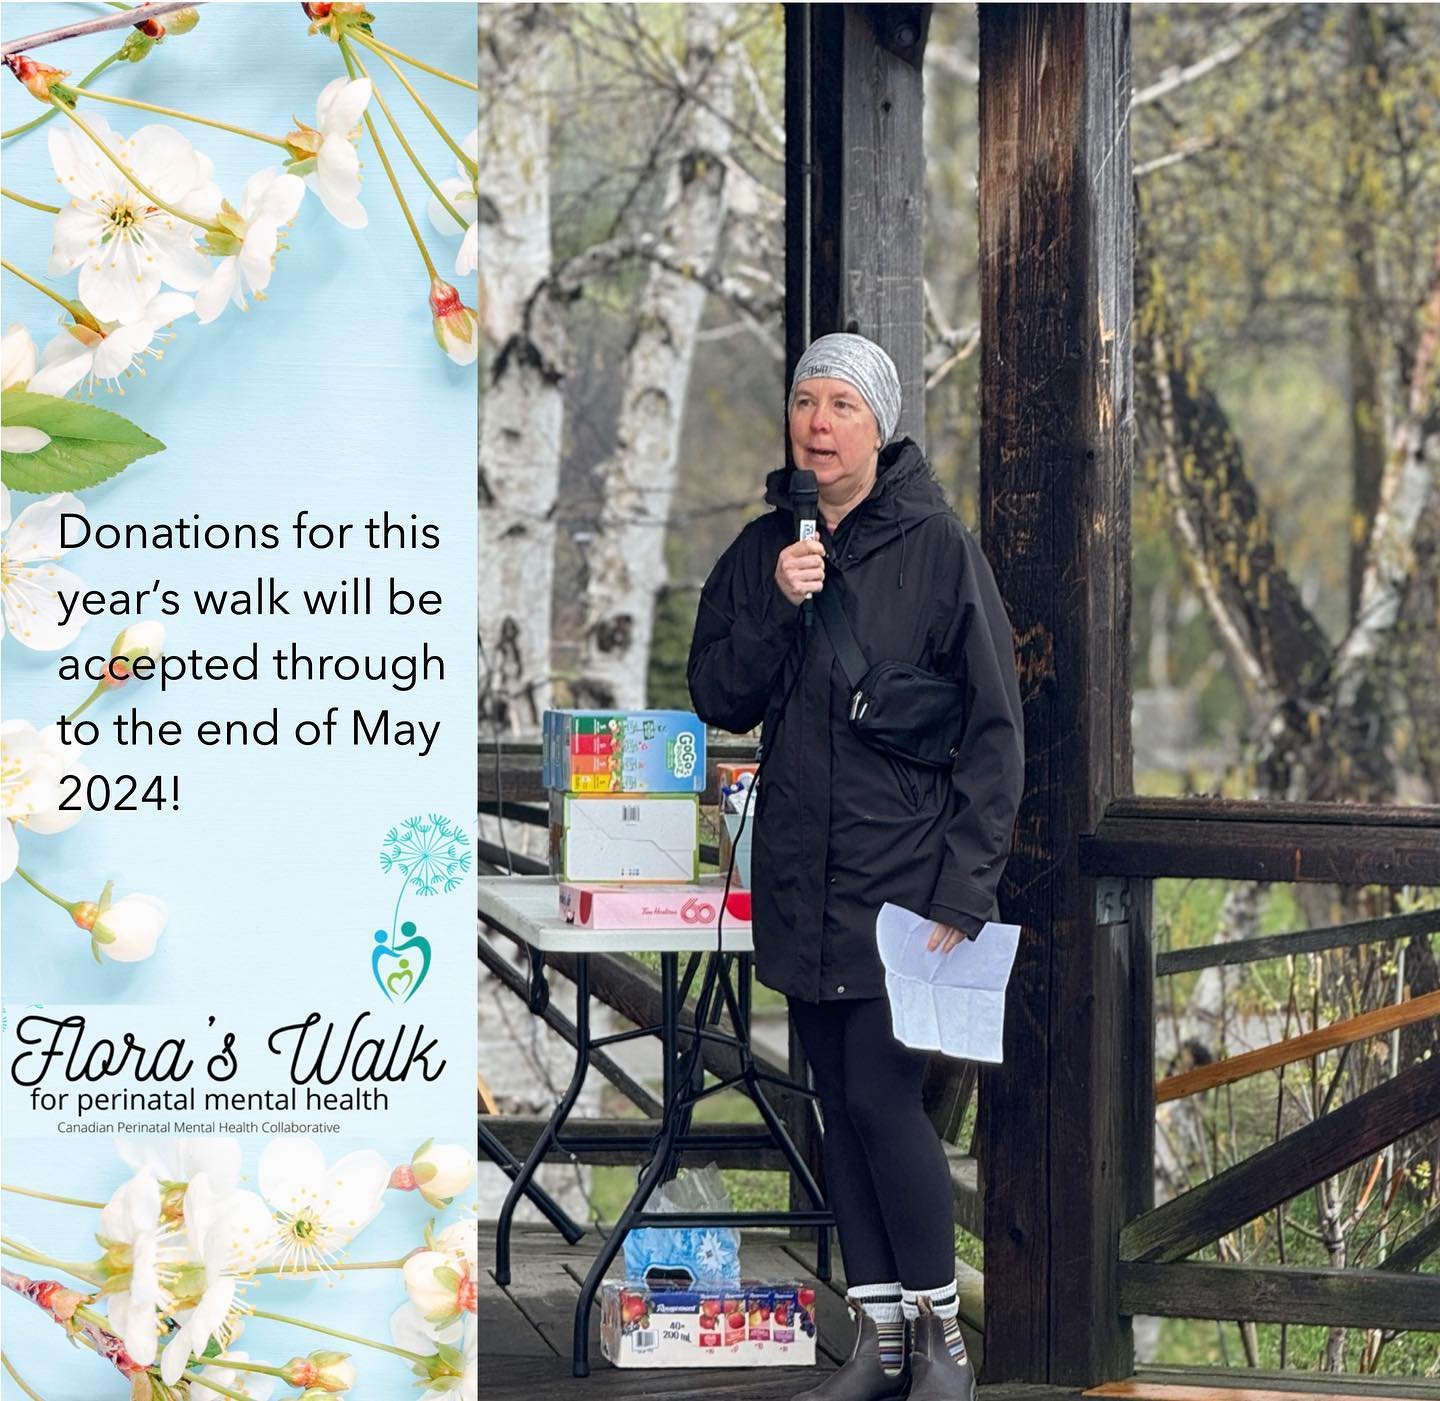 A few days before Flora&rsquo;s Walk, I was asked if I would say a few words at the event. My first thought was &lsquo;no!&rsquo; (like many people, public speaking ranks pretty high on my list of fears). But then I thought about how much perinatal m